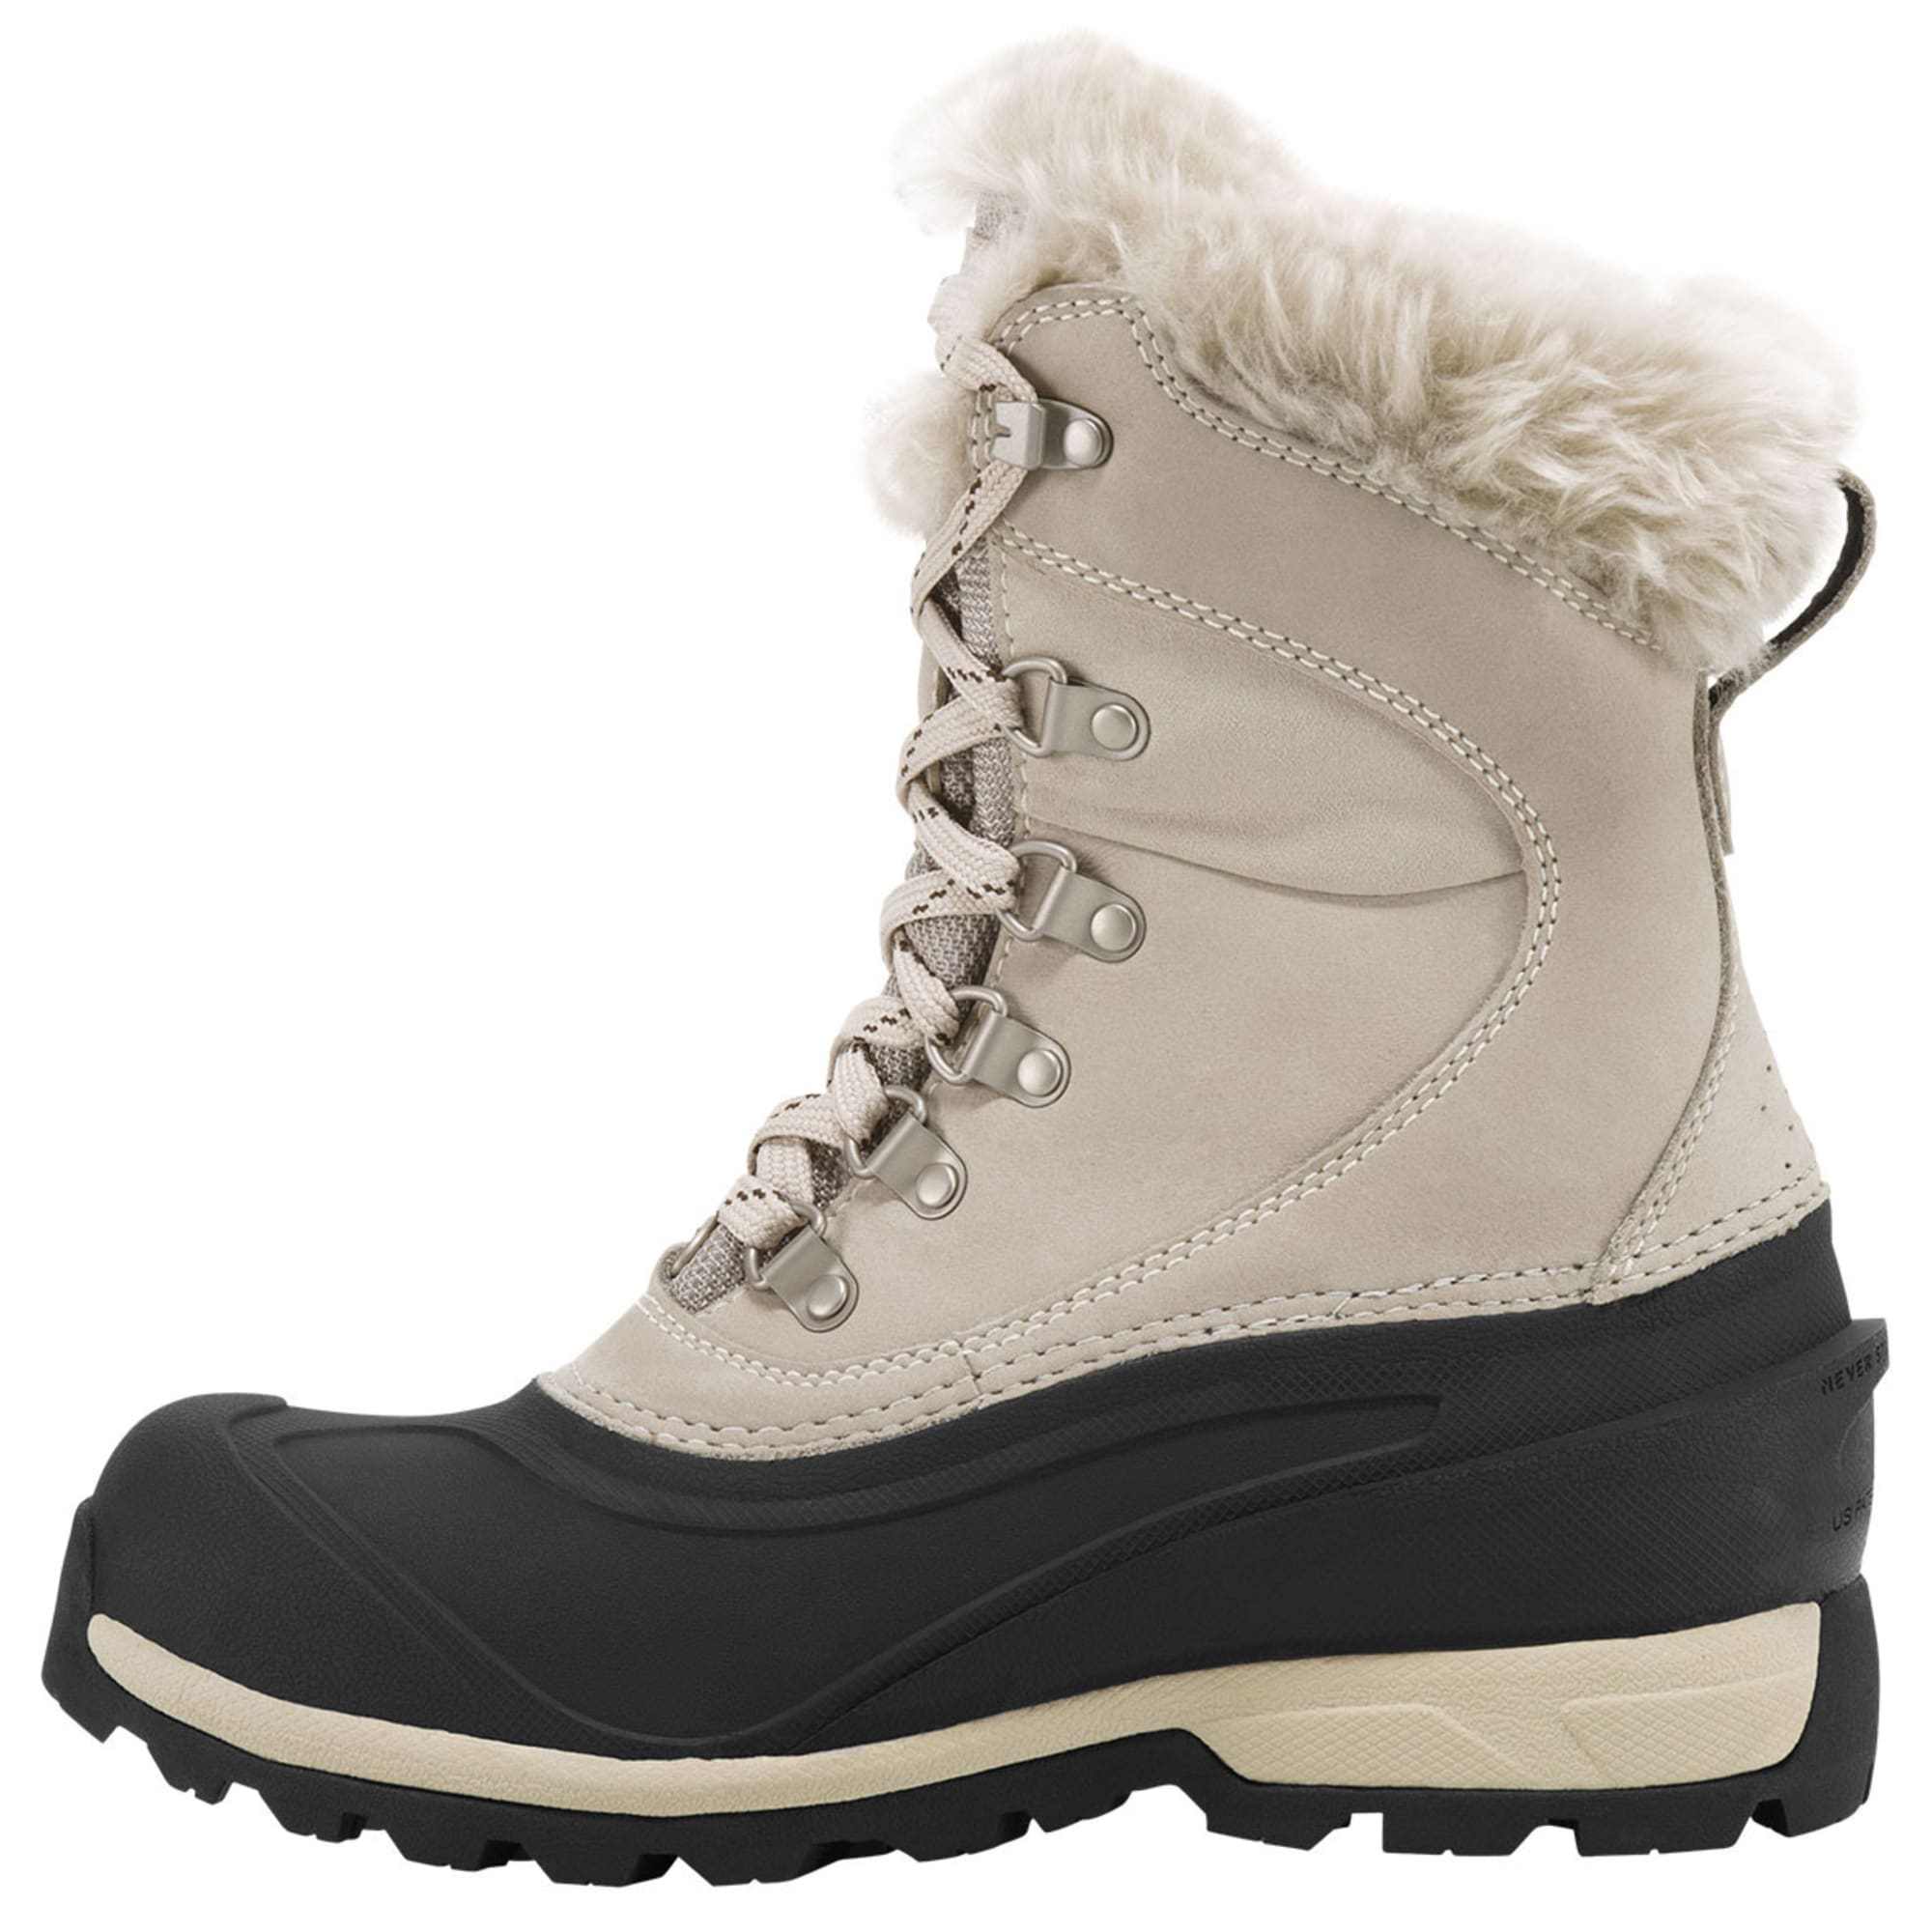 north face women's chilkat 400 boots